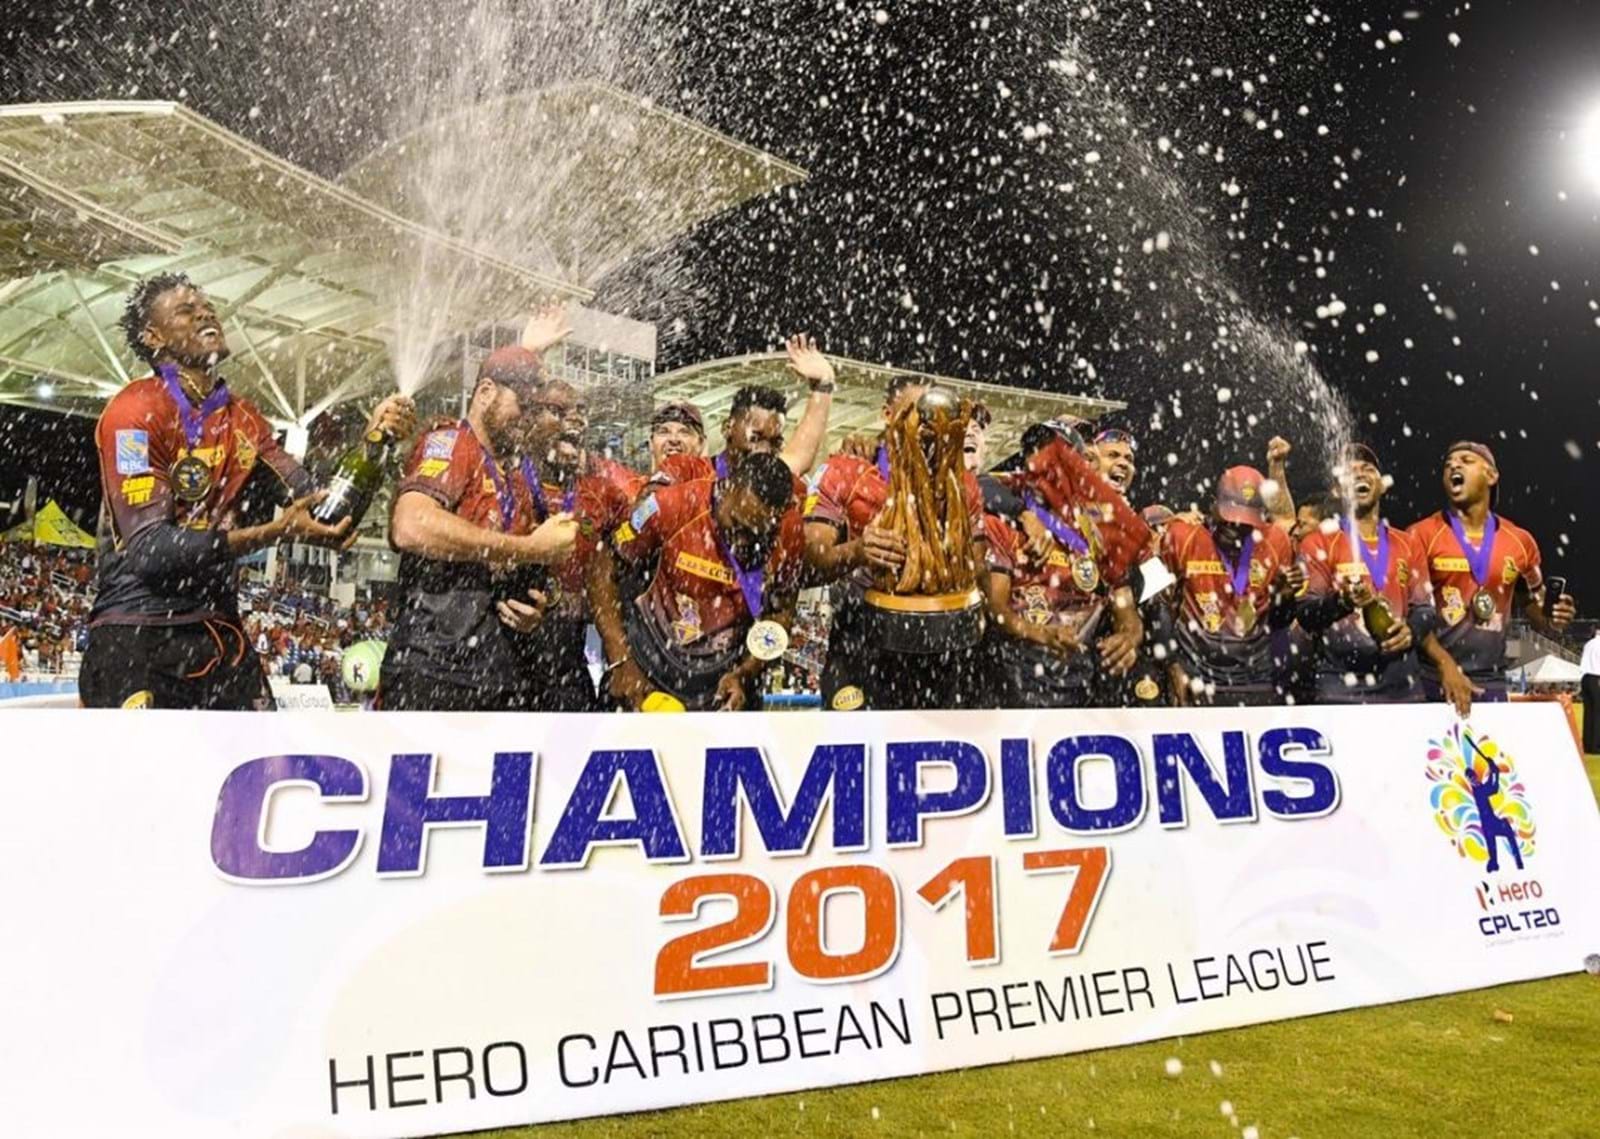 SUNSET+VINE WINS THREE YEAR CONTRACT FOR HERO CARIBBEAN PREMIER LEAGUE 